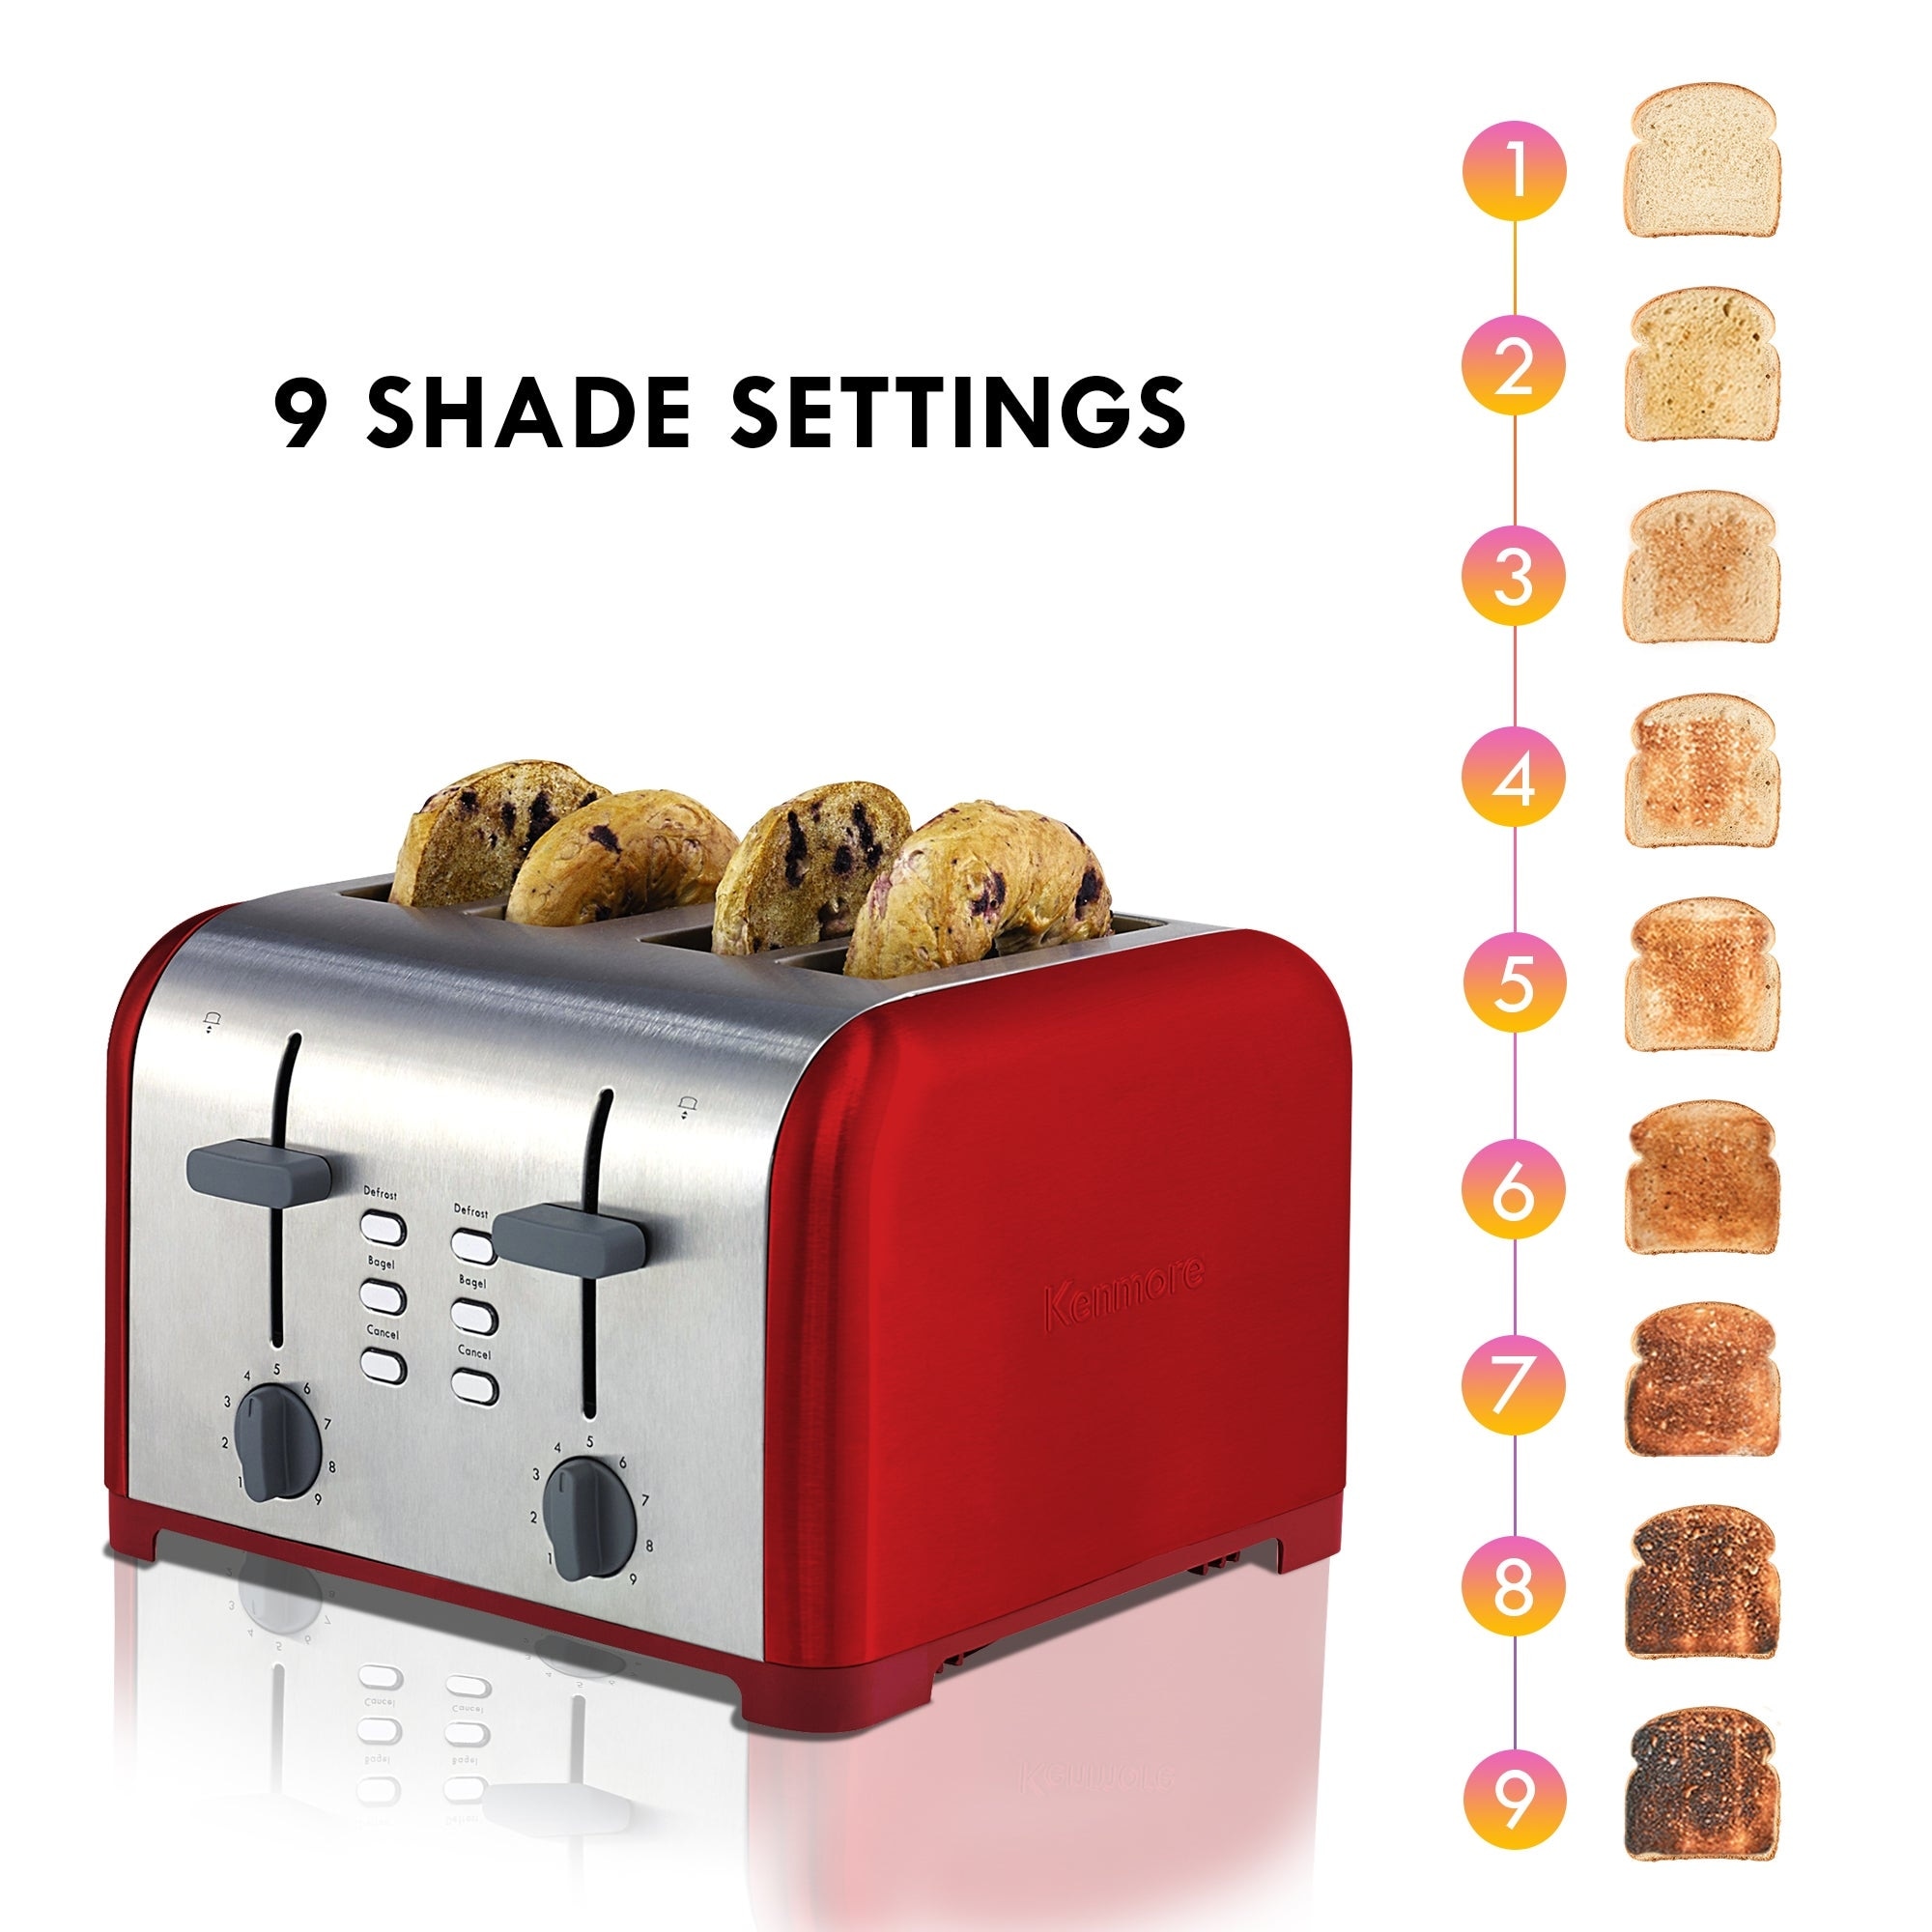 https://ak1.ostkcdn.com/images/products/is/images/direct/2981d538c50781a533756d005bc6f252b771c92b/Kenmore-4-Slice-Toaster-with-Dual-Controls%2C-Red.jpg